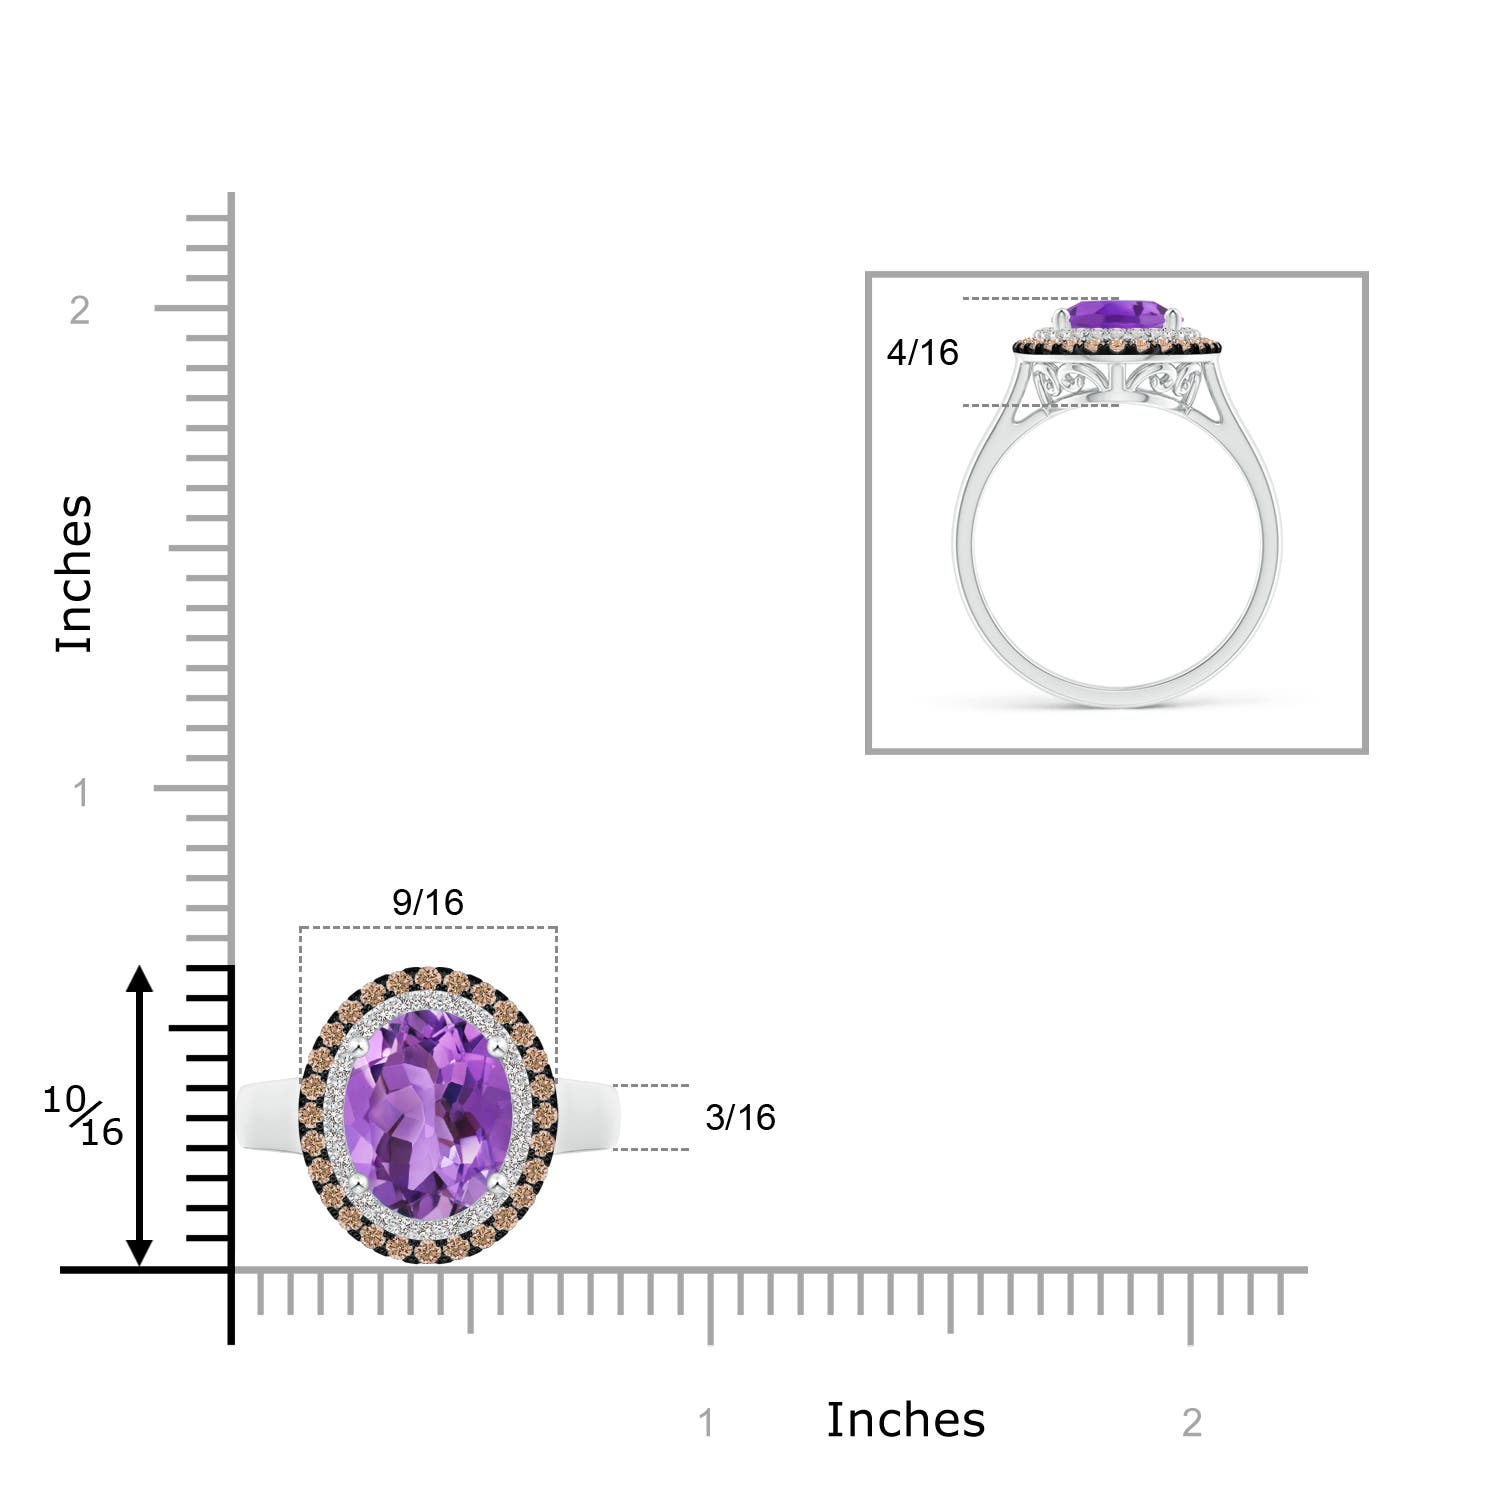 AA - Amethyst / 3.71 CT / 14 KT White Gold